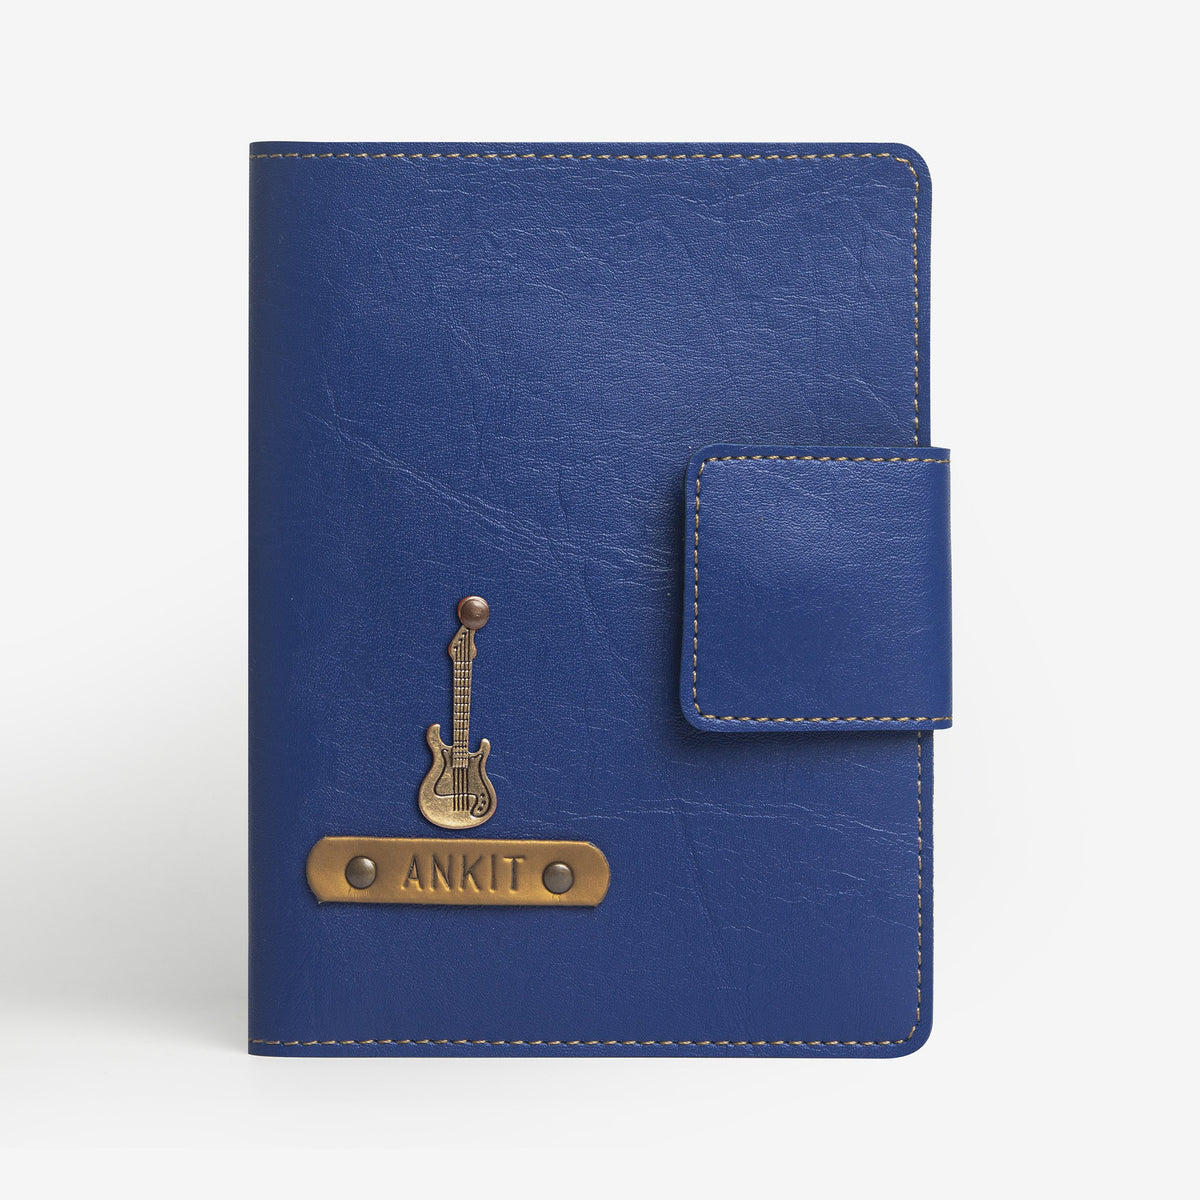 The Messy Corner Mini Travel Wallet Passport cover with button - Blue